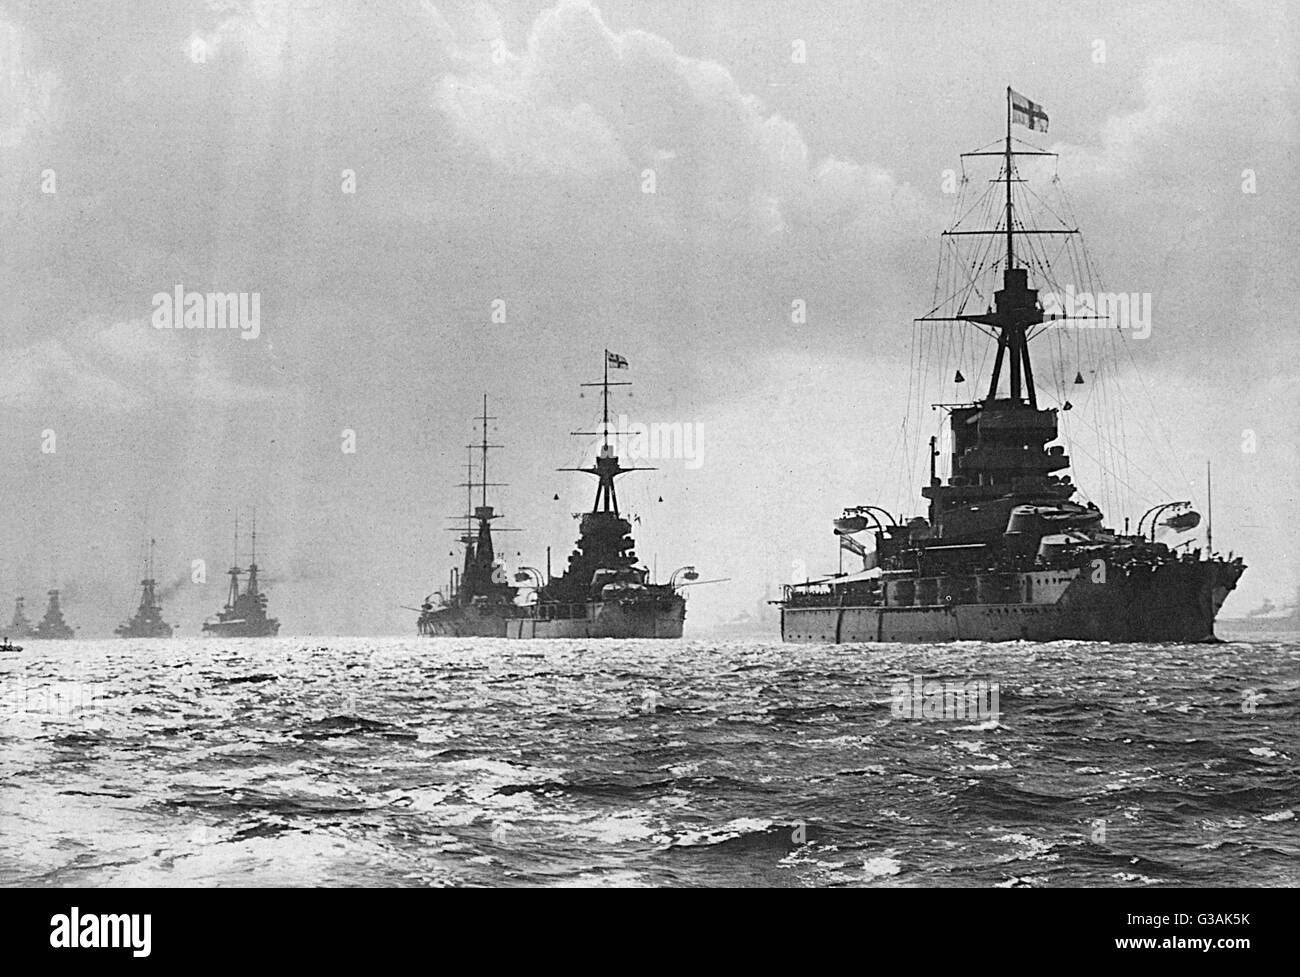 The British Fleet was concentrated at Spithead a fortnight before the outbreak of World War I. Twenty-two miles of warships ranging from Dreadnoughts to Destroyers passed in procession before King George V and the Prince of Wales.     Date: 1914 Stock Photo